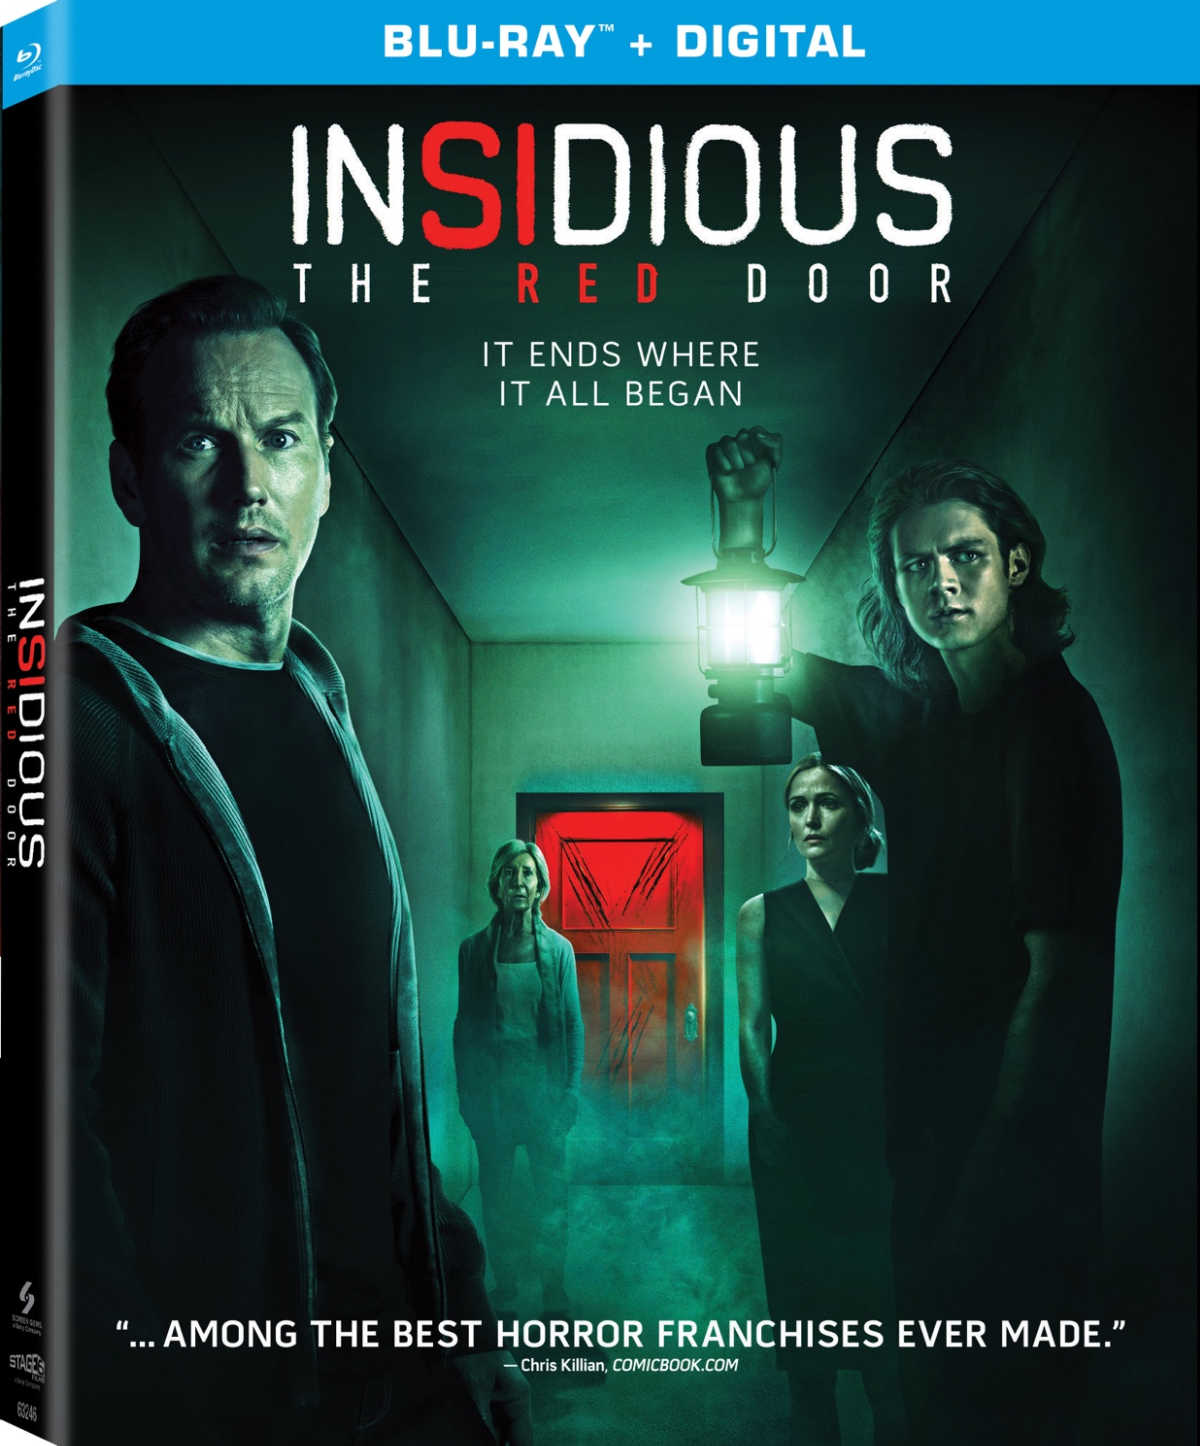 Insidious: The Red Door Blu-ray is here, and it's terrifying! This final chapter in the franchise is a must-have for horror fans.